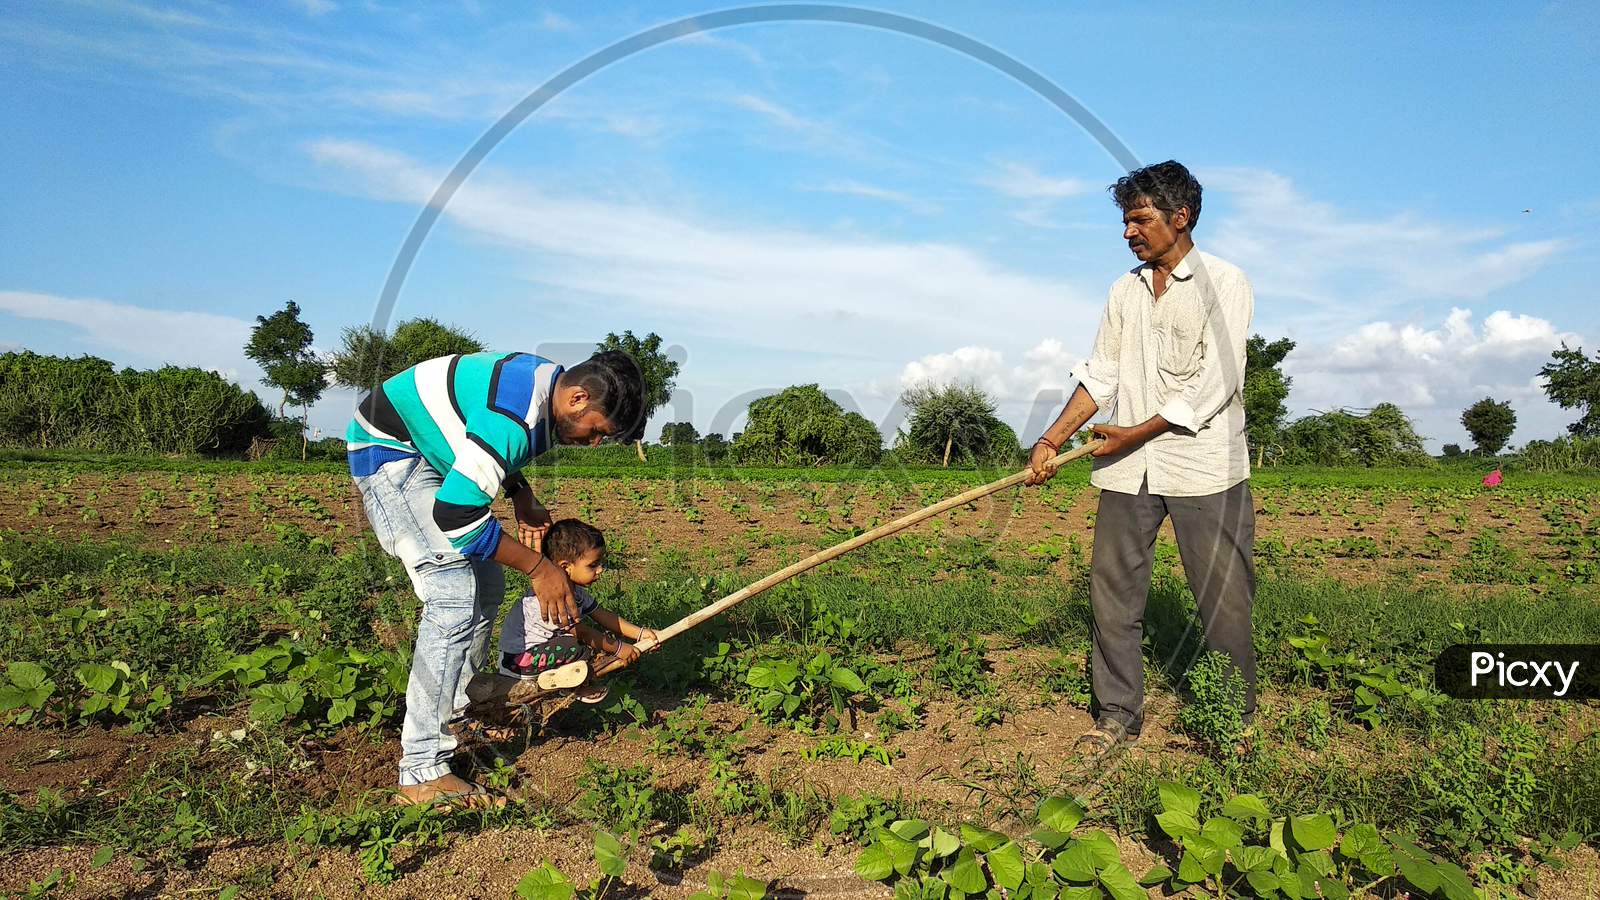 17 july 2020 india: A young Indian child is having fun on a farm with his grandfather and uncle